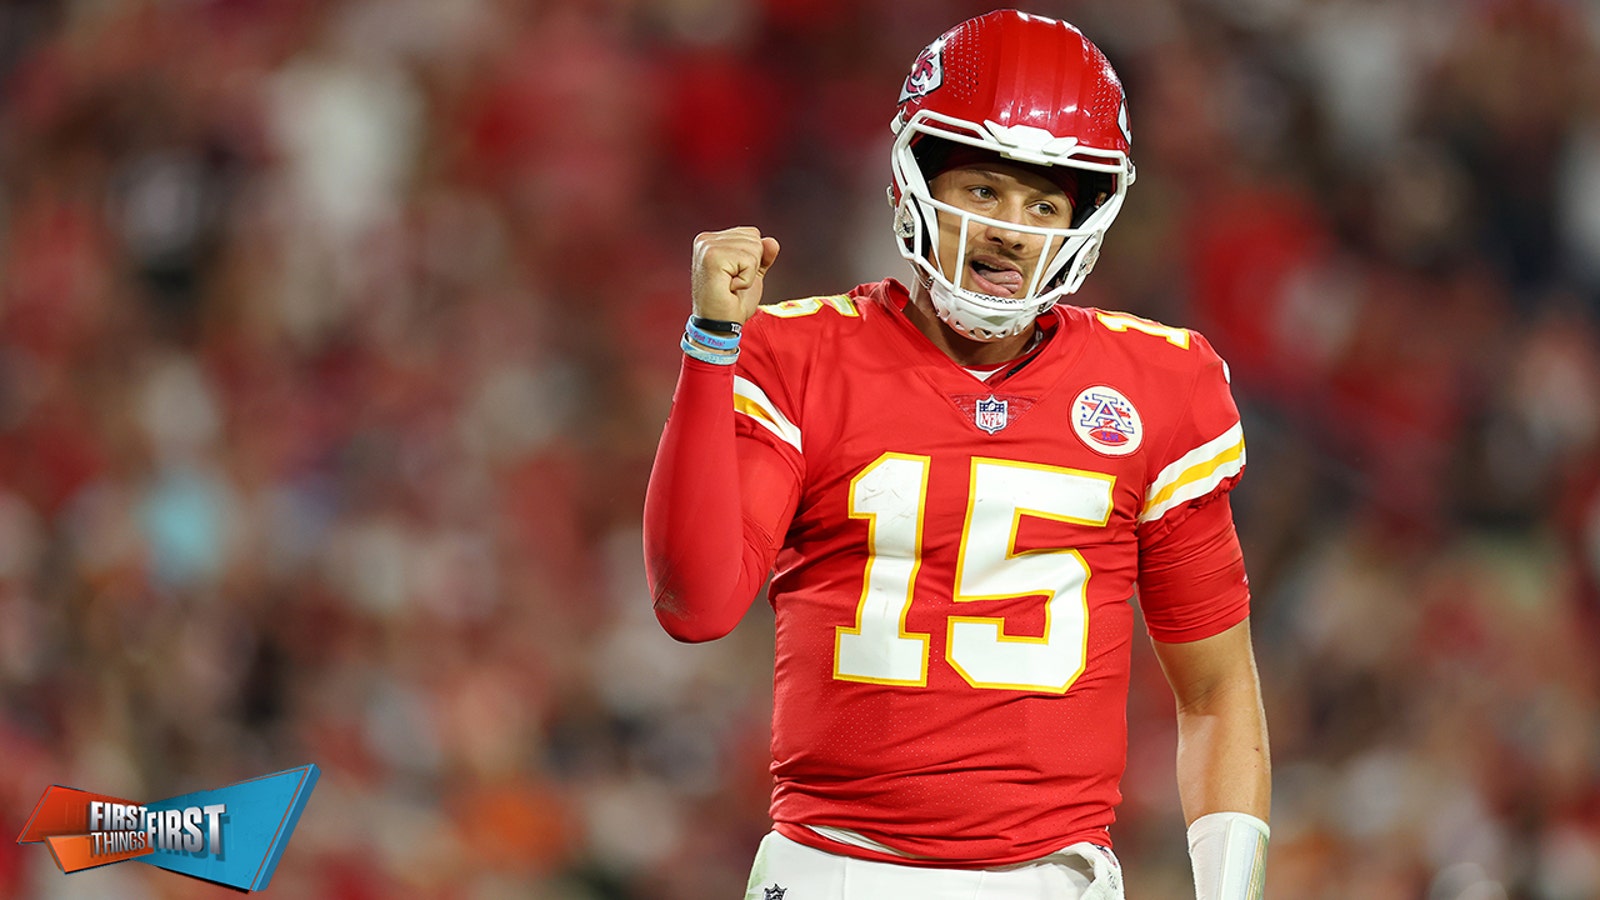 Patrick Mahomes throws 3 TDs in Chiefs win over Tom Brady, Bucs |  FIRST-FIRST